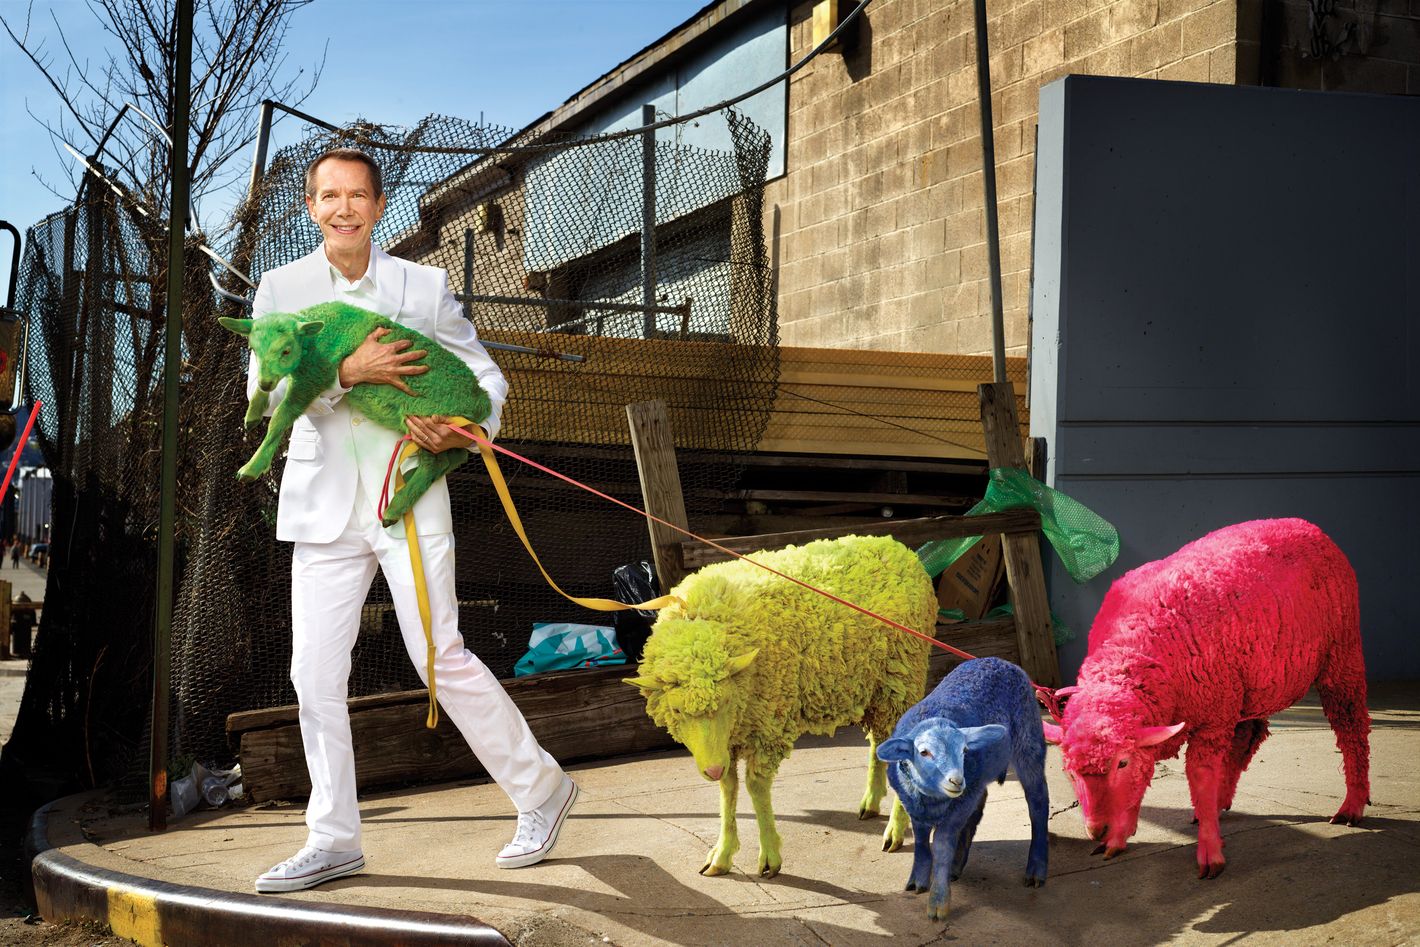 Jeff Koons on his 'wild years' and going from penniless to the